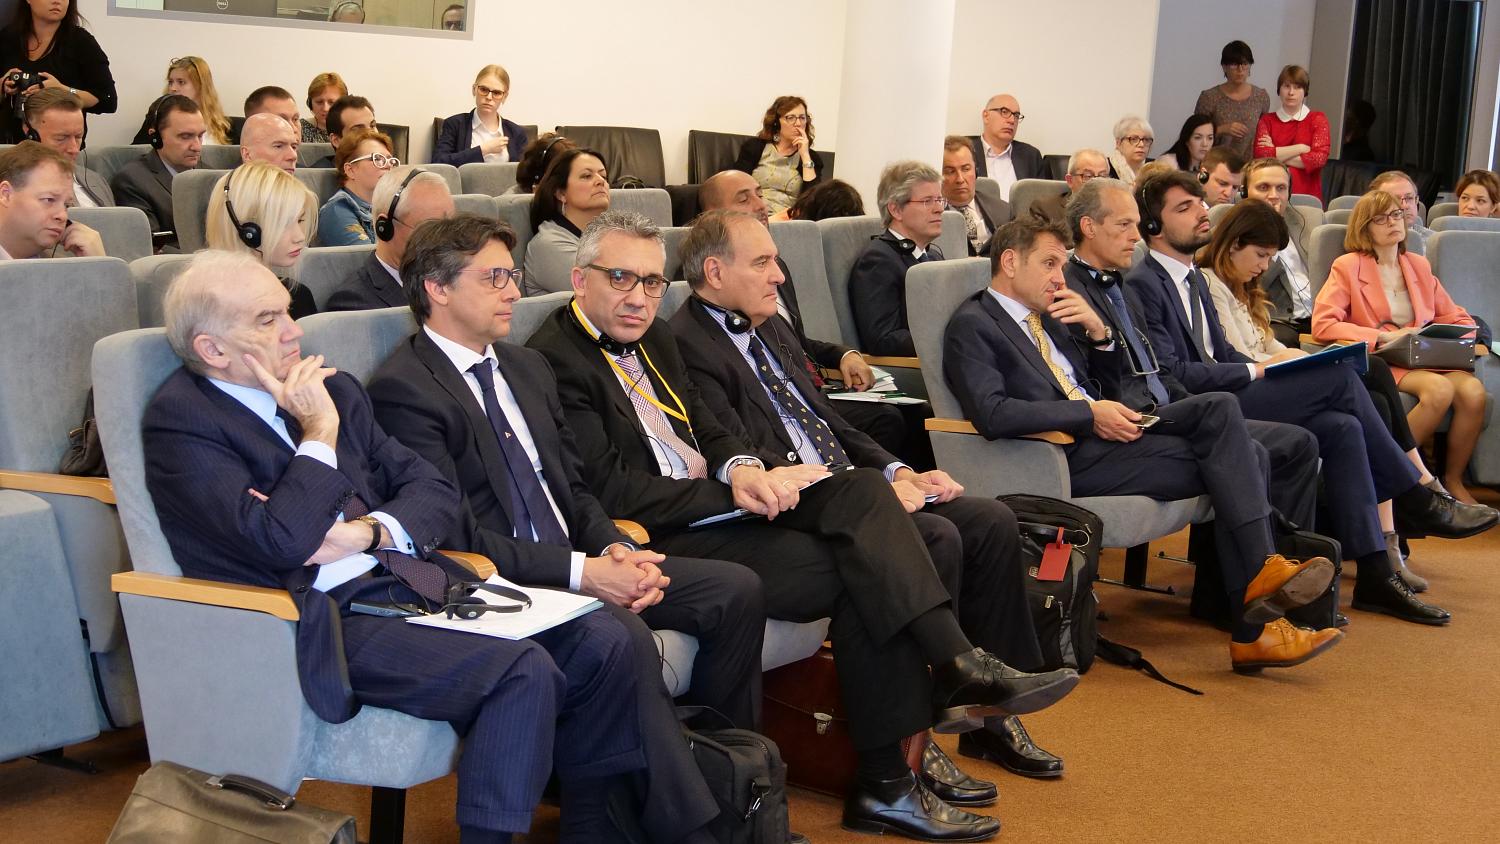 A Forum of the Russian-Italian cooperation was held at the MCCI